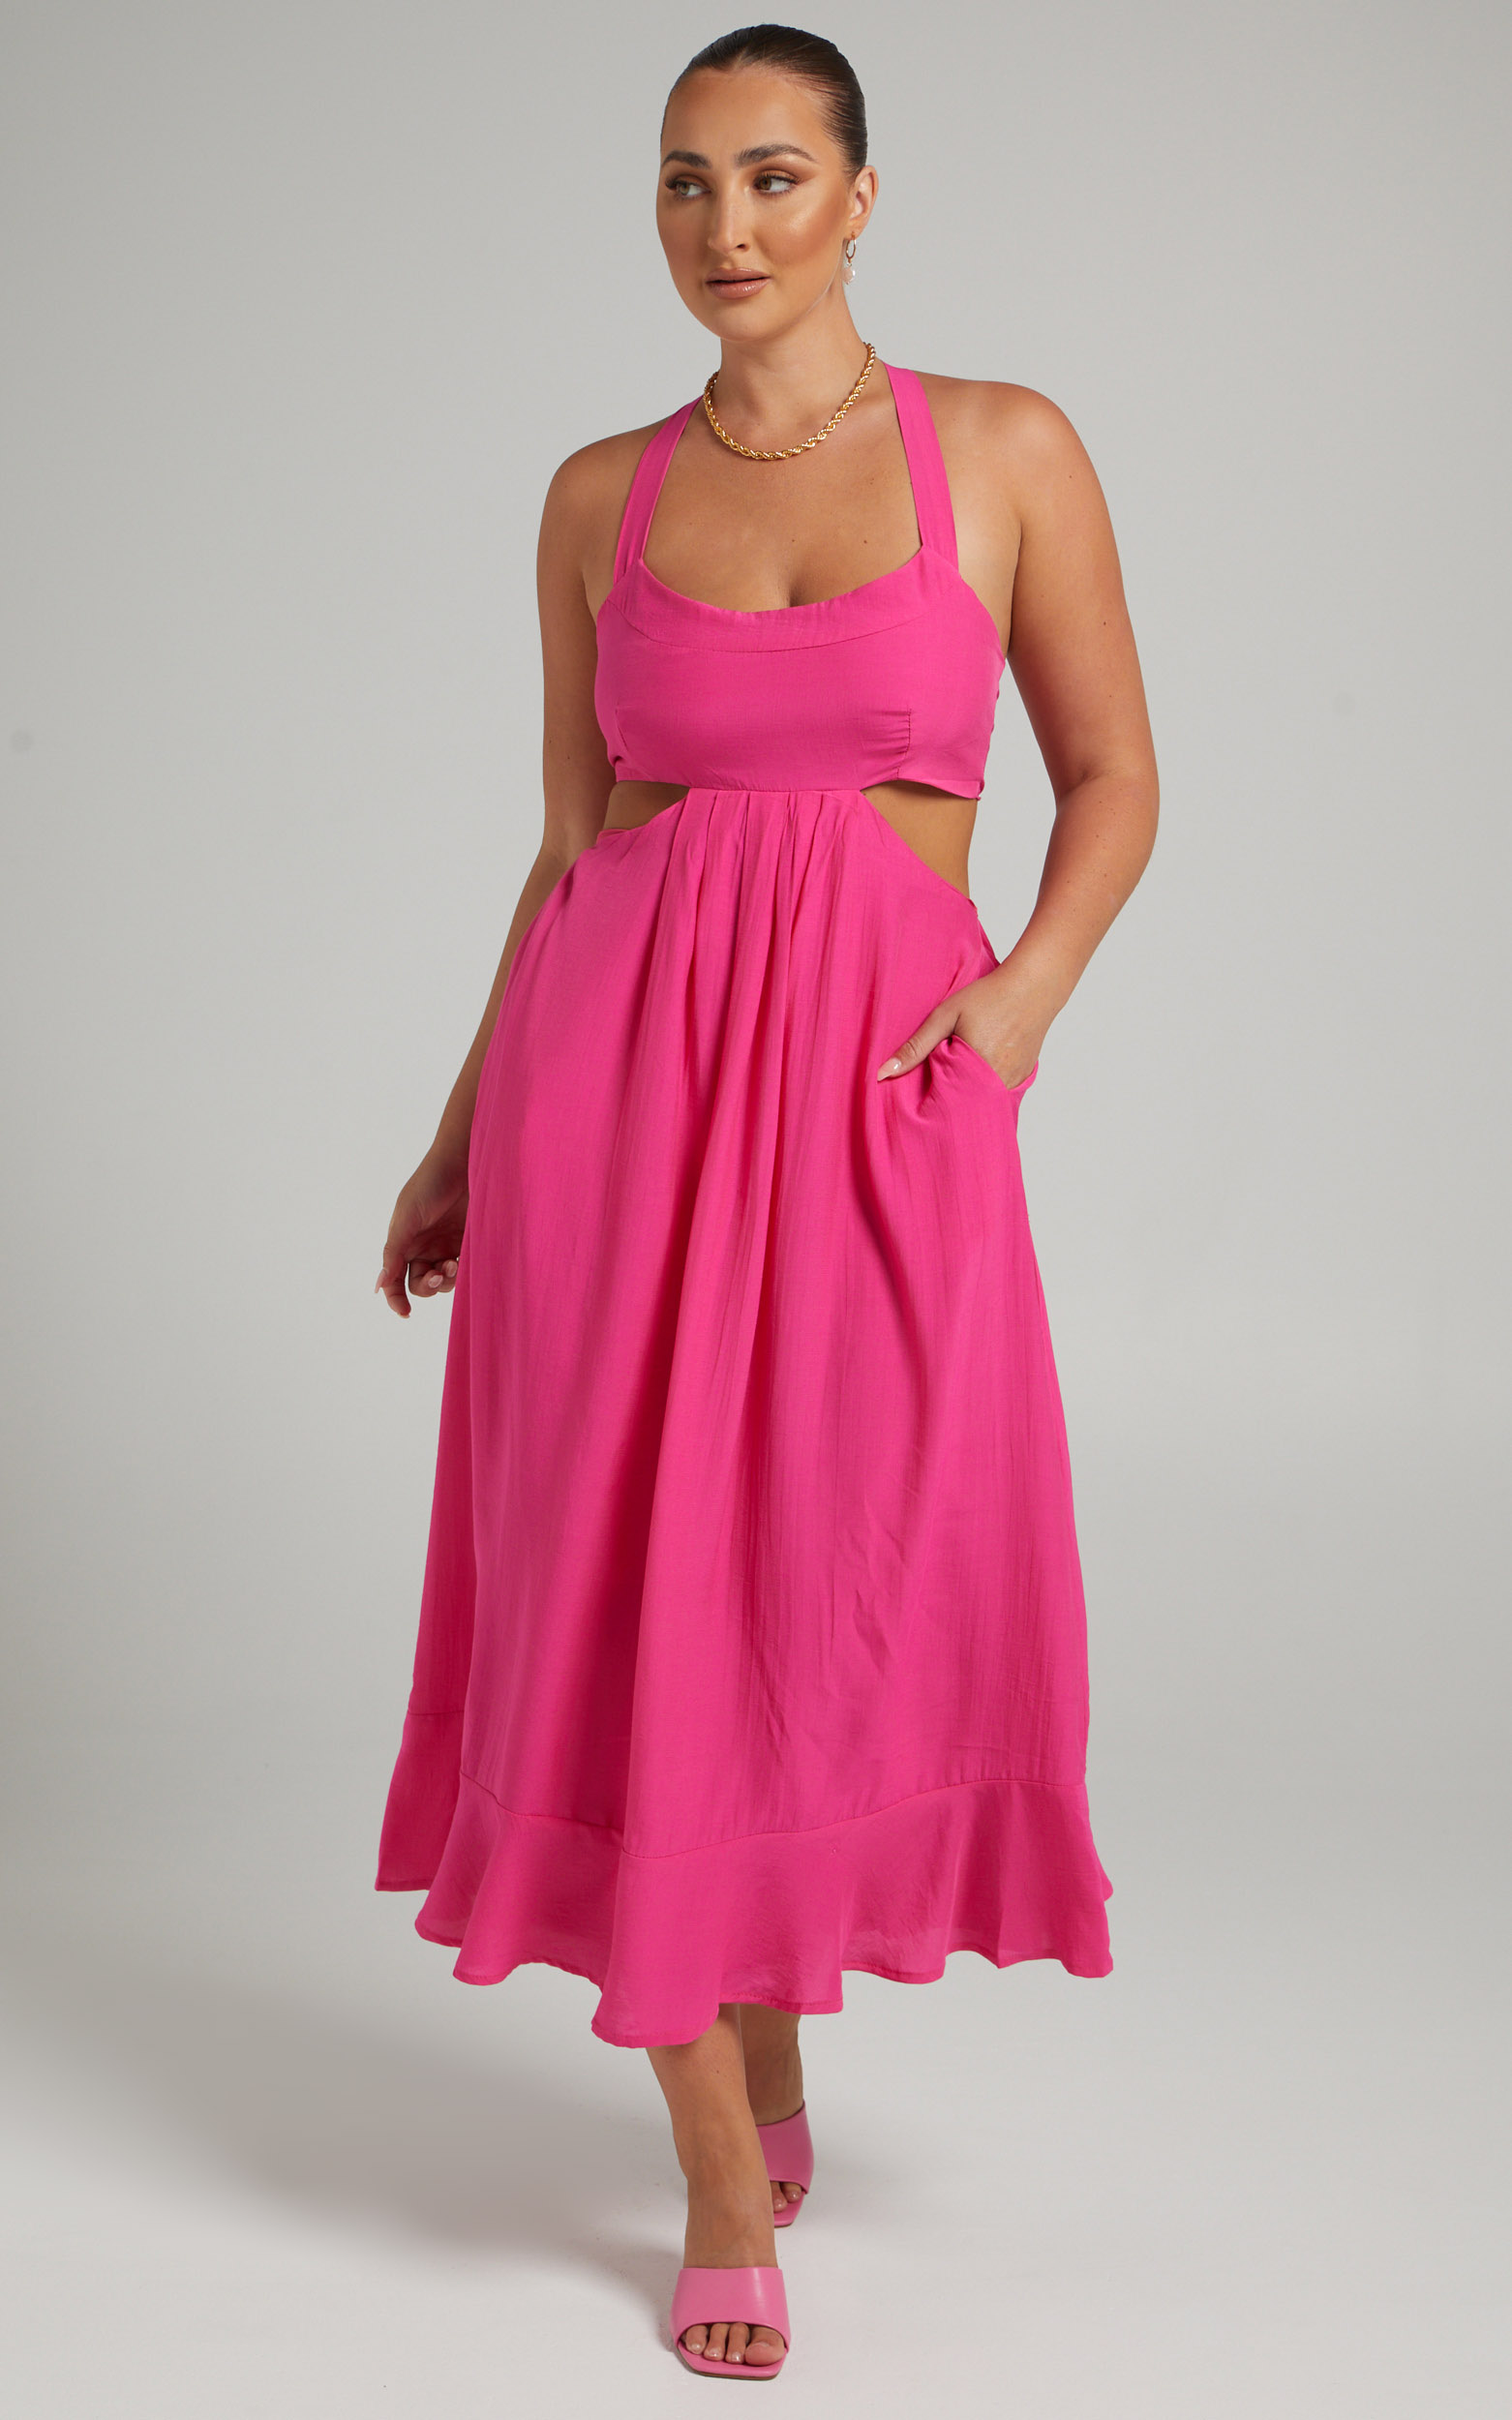 leontine-midi-dress-with-tie-up-back-in-hot-pink